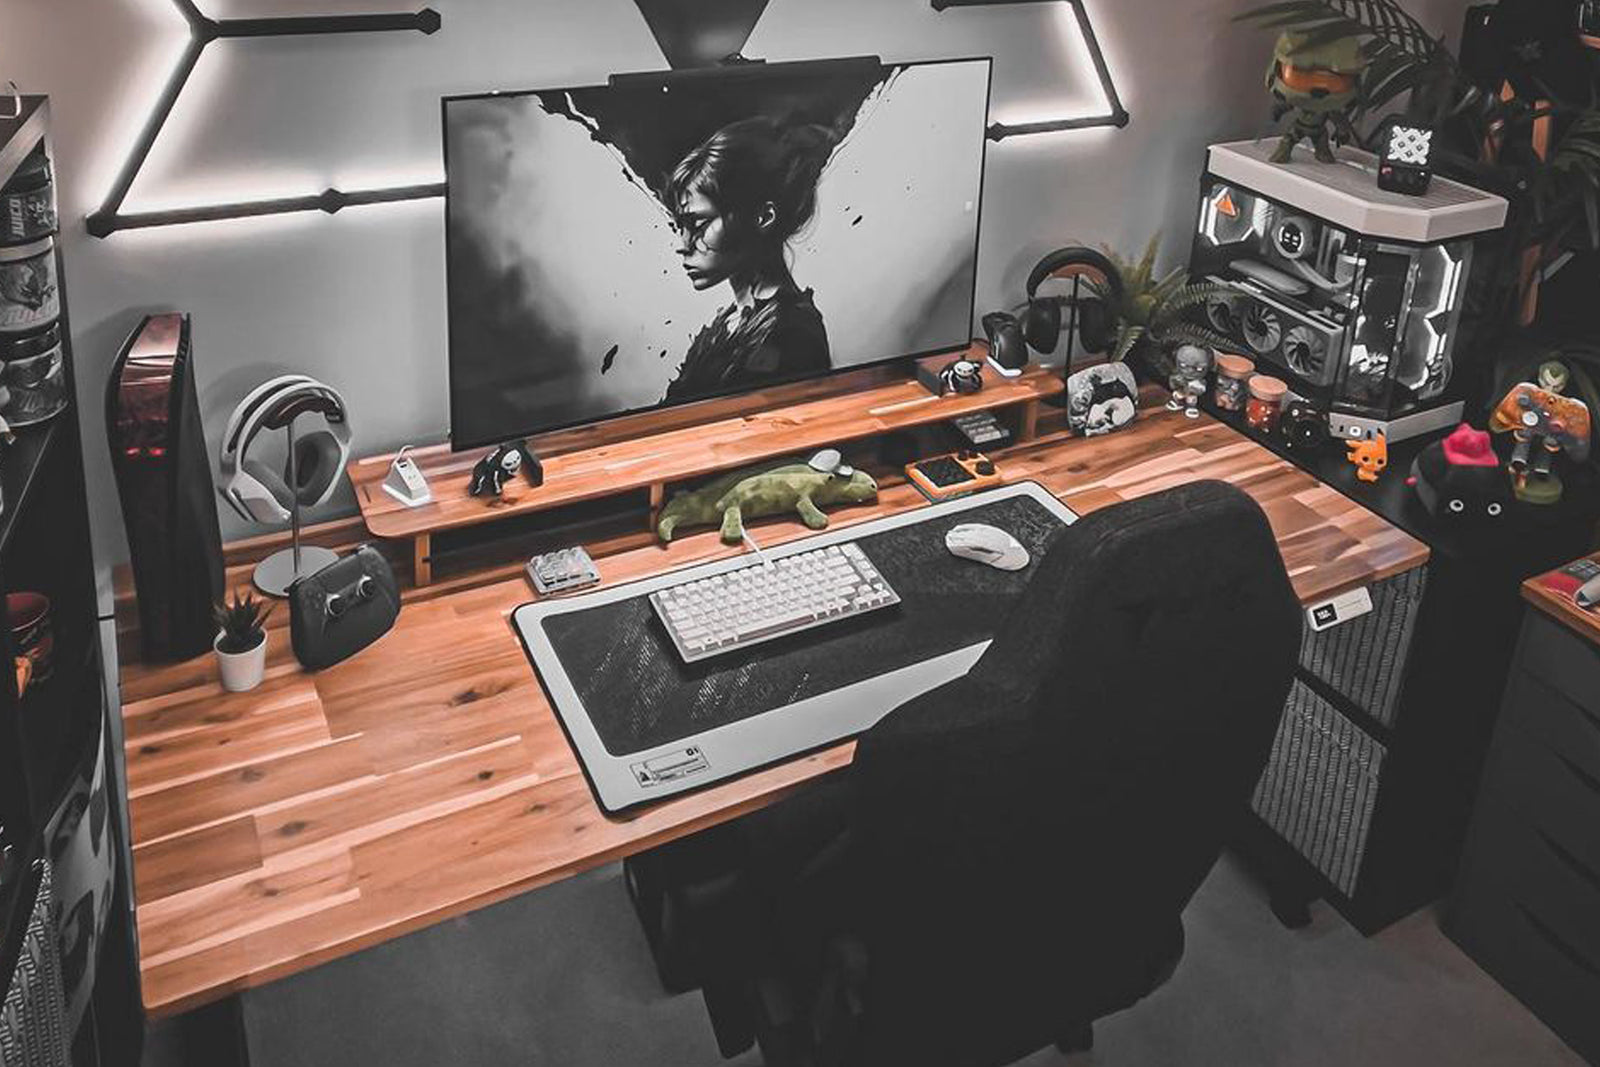 Check Out These Gaming Accessories To Make Your Desk Your Own! - Omnidesk